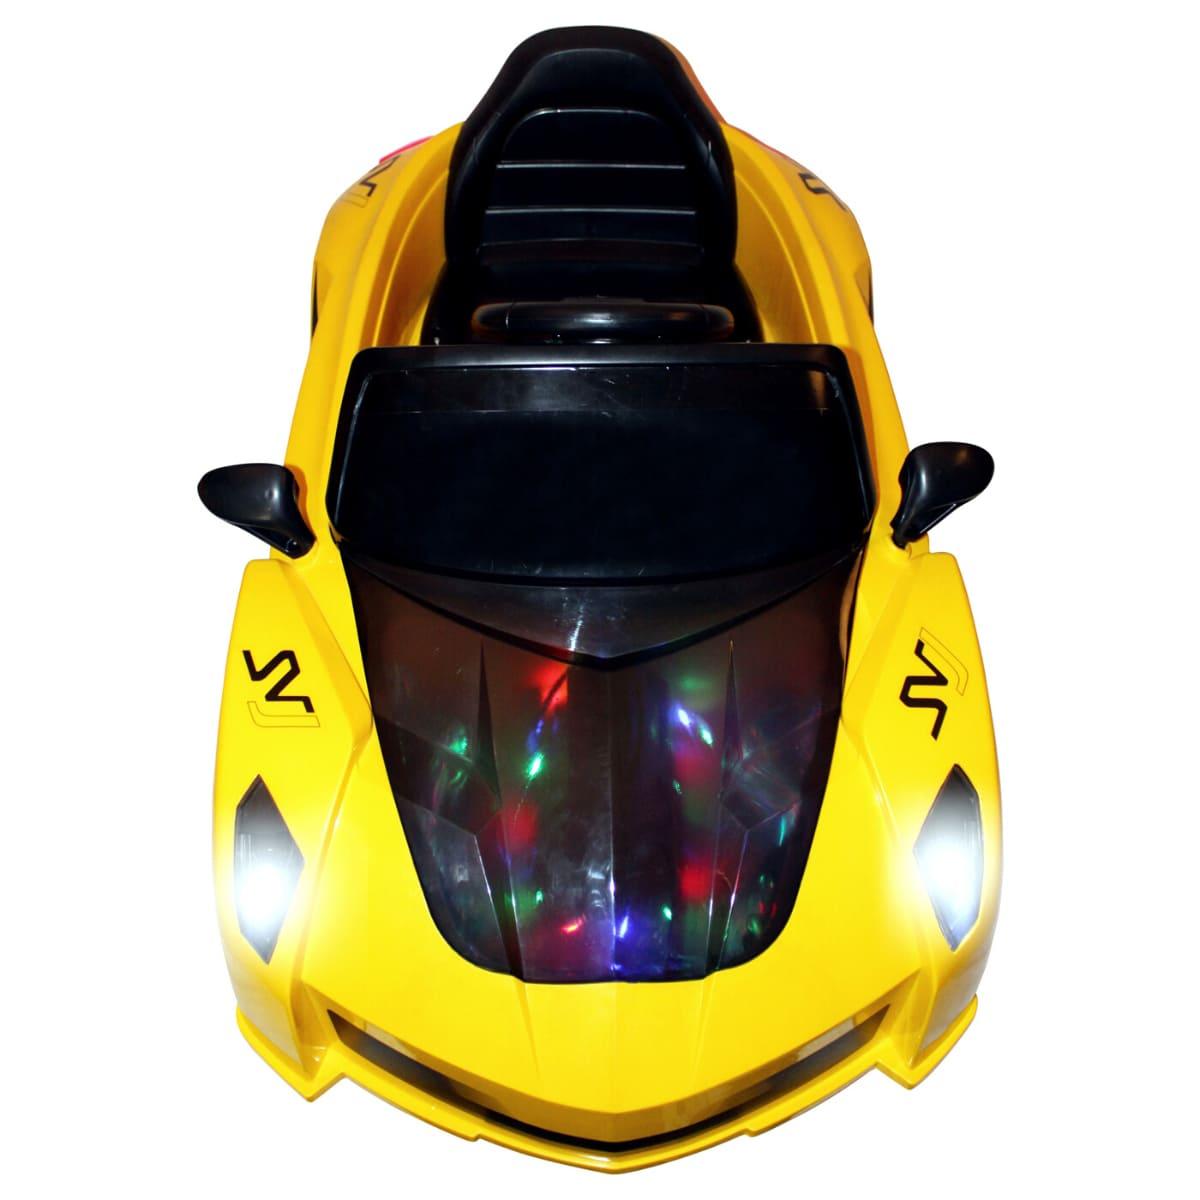 PATOYS | Rambo-Lamboo Best Electric Car for Kids, Remote with Swing Function LFC-YKL-2688 | Yellow - PATOYS